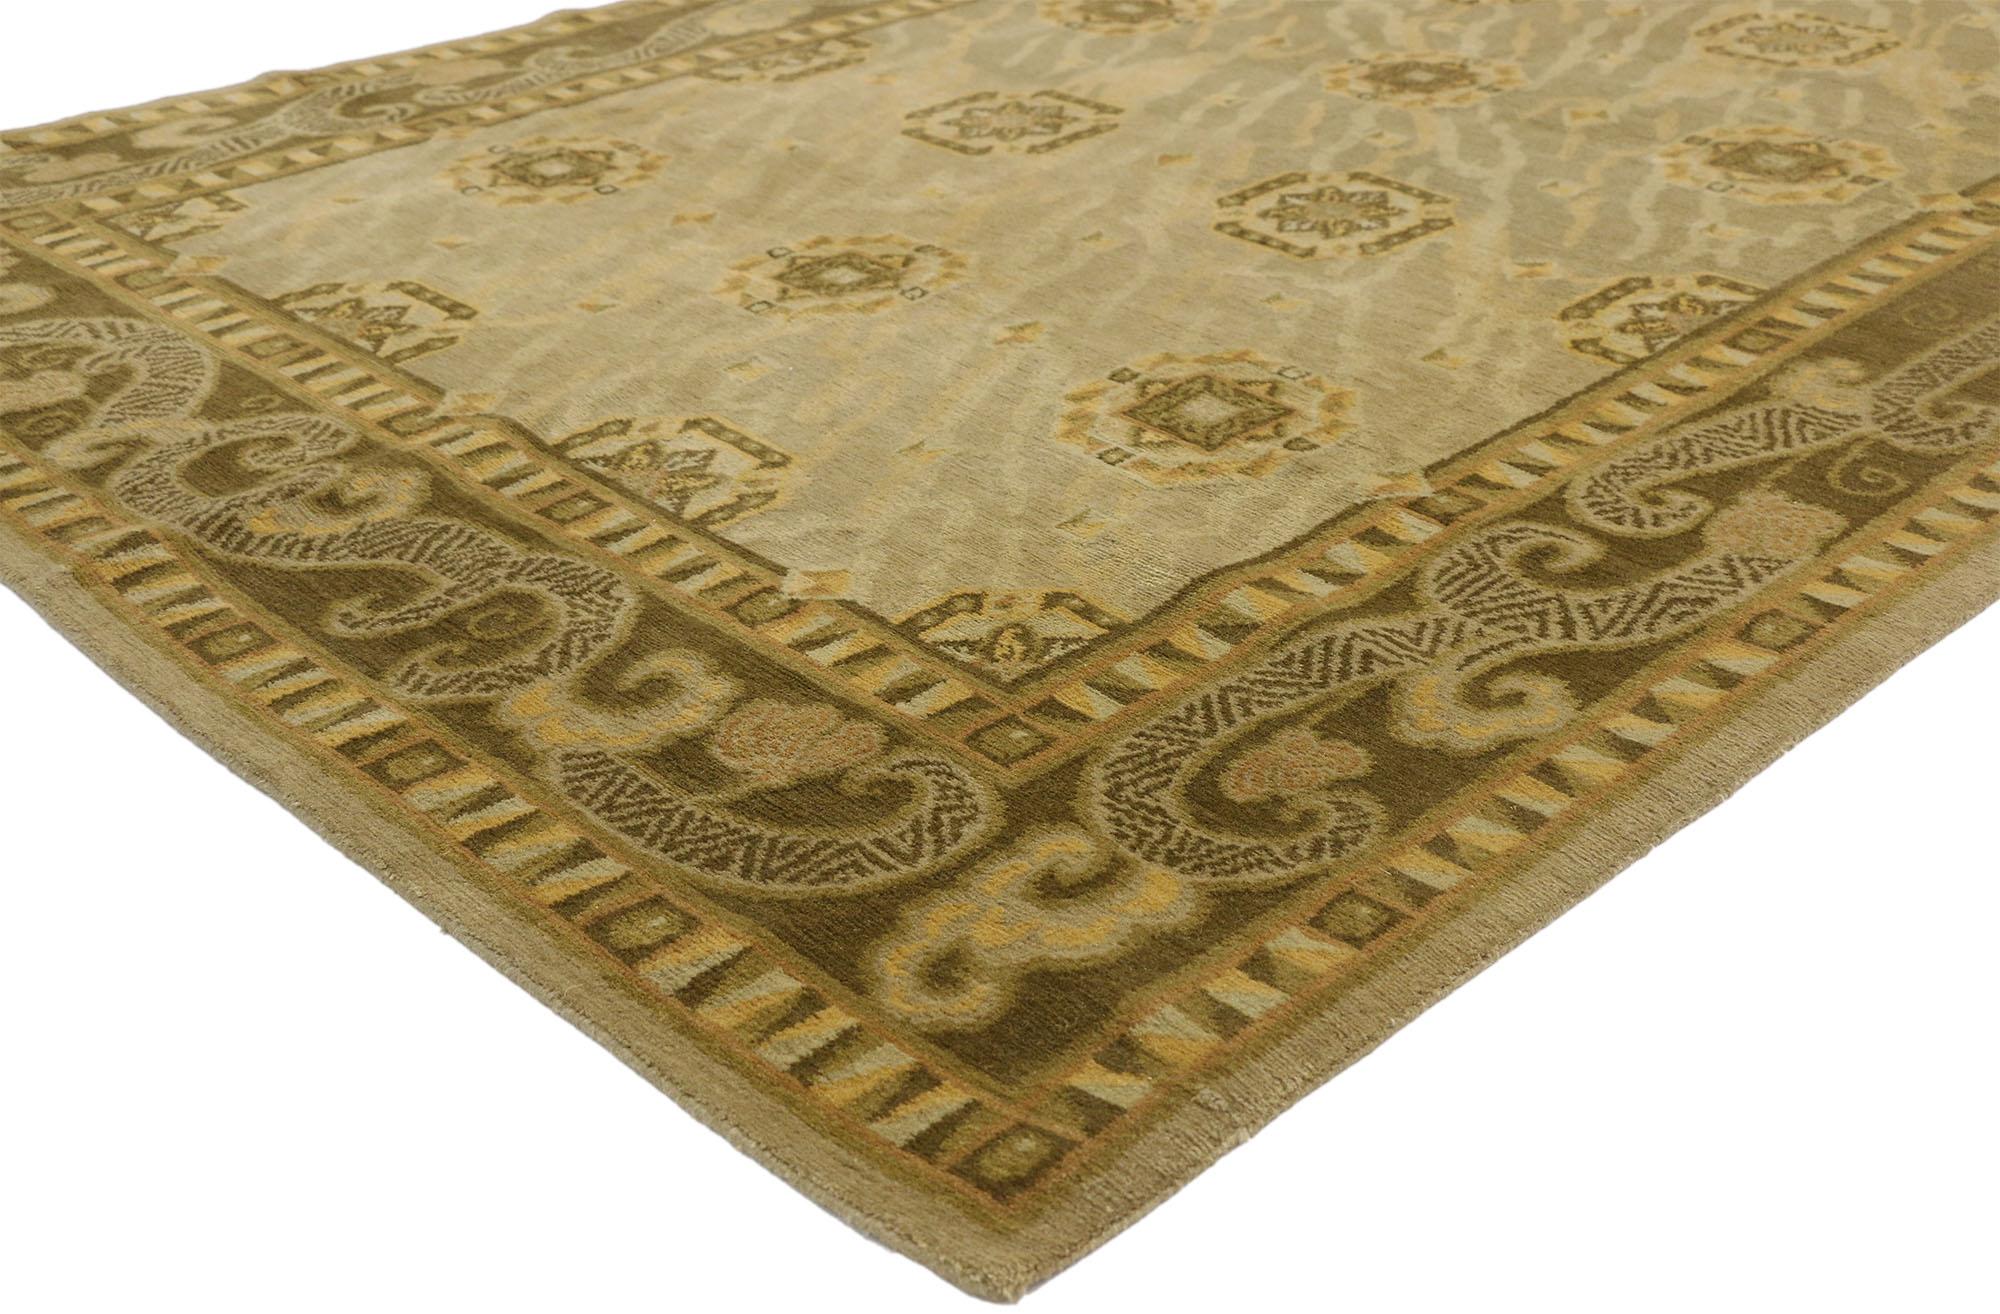 77249 Vintage Tibetan Area Rug with Chinese Art Deco Style 05'08 x 09'05. This hand-knotted wool vintage Tibetan area rug features rows of alternating gul amulets spread across a field reminisce of subterranean rock veins. It is enclosed with cloud